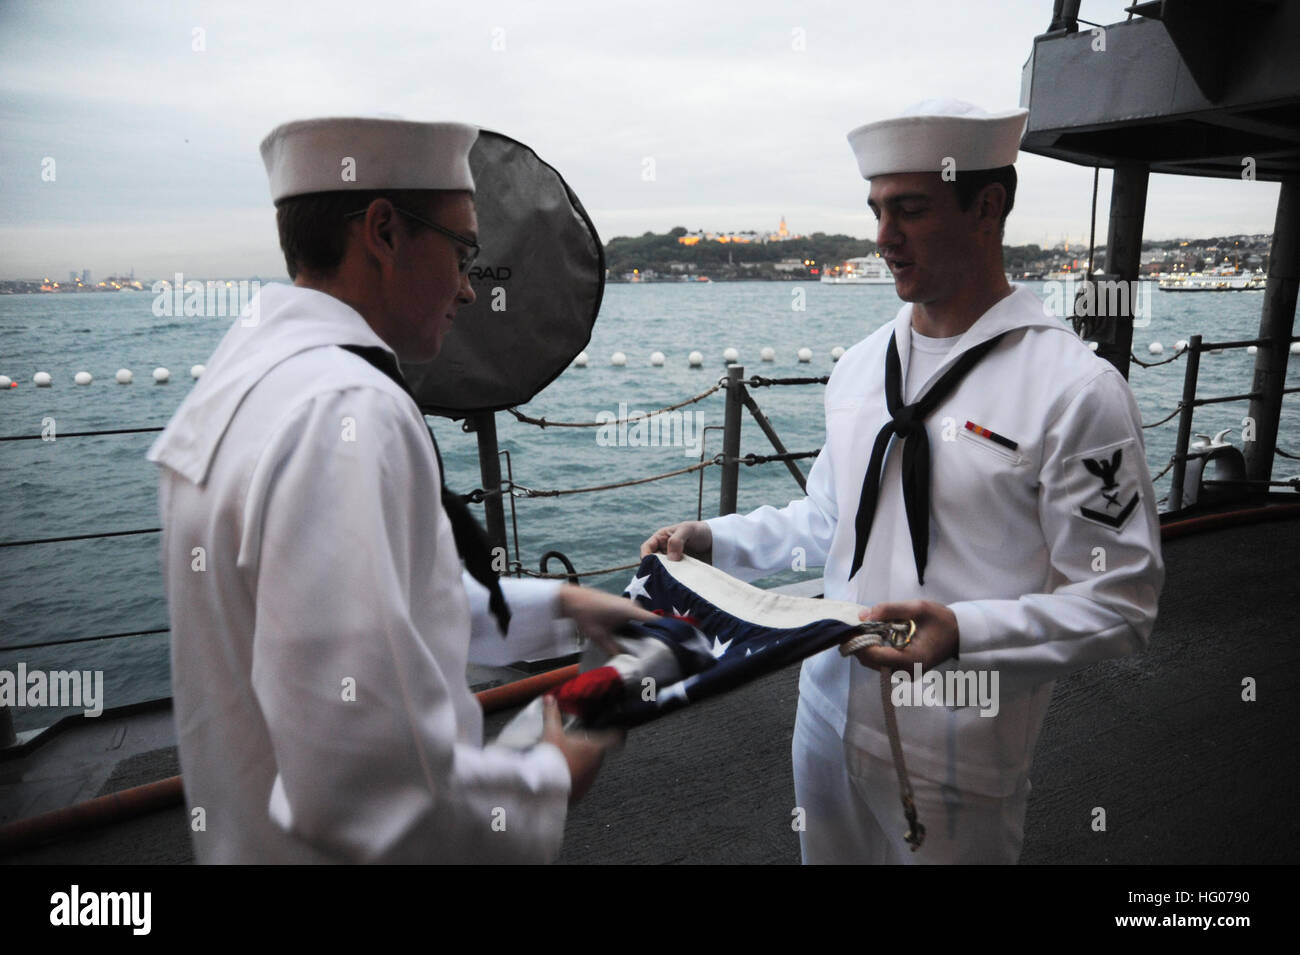 111014-N-RB564-011 ISTANBUL (Oct. 14, 2011) Seaman Apprentice Stephen Carr, left, and Cryptologic Technician 3rd Class Jacob Blackwell, fold the national ensign during evening colors aboard the guided-missile cruiser USS Philippine Sea (CG 58) during a four-day port visit in Istanbul. Philippine Sea is on a scheduled deployment in the Black Sea and serves to promote peace and security in the U.S. 6th Fleet area of responsibility. (U.S. Navy photo by Mass Communication Specialist 2nd Class Gary Prill/Released) US Navy 111014-N-RB564-011 Seaman Apprentice Stephen Carr, left, and Cryptologic Tech Stock Photo